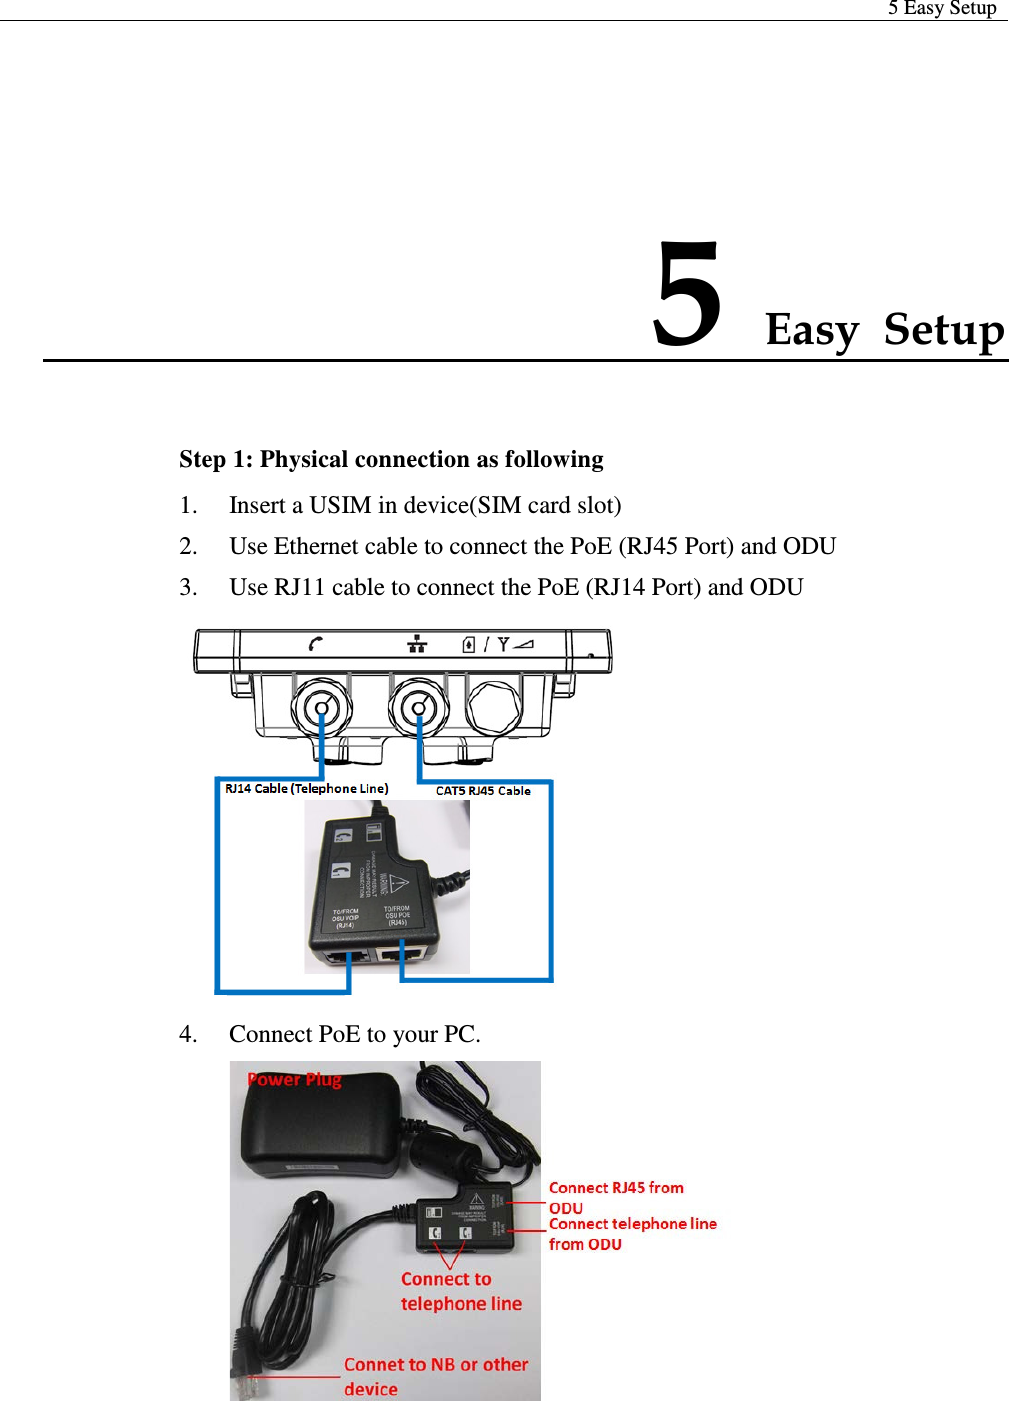  5 Easy Setup  5 Easy Setup Step 1: Physical connection as following 1. Insert a USIM in device(SIM card slot) 2. Use Ethernet cable to connect the PoE (RJ45 Port) and ODU 3. Use RJ11 cable to connect the PoE (RJ14 Port) and ODU  4. Connect PoE to your PC.   